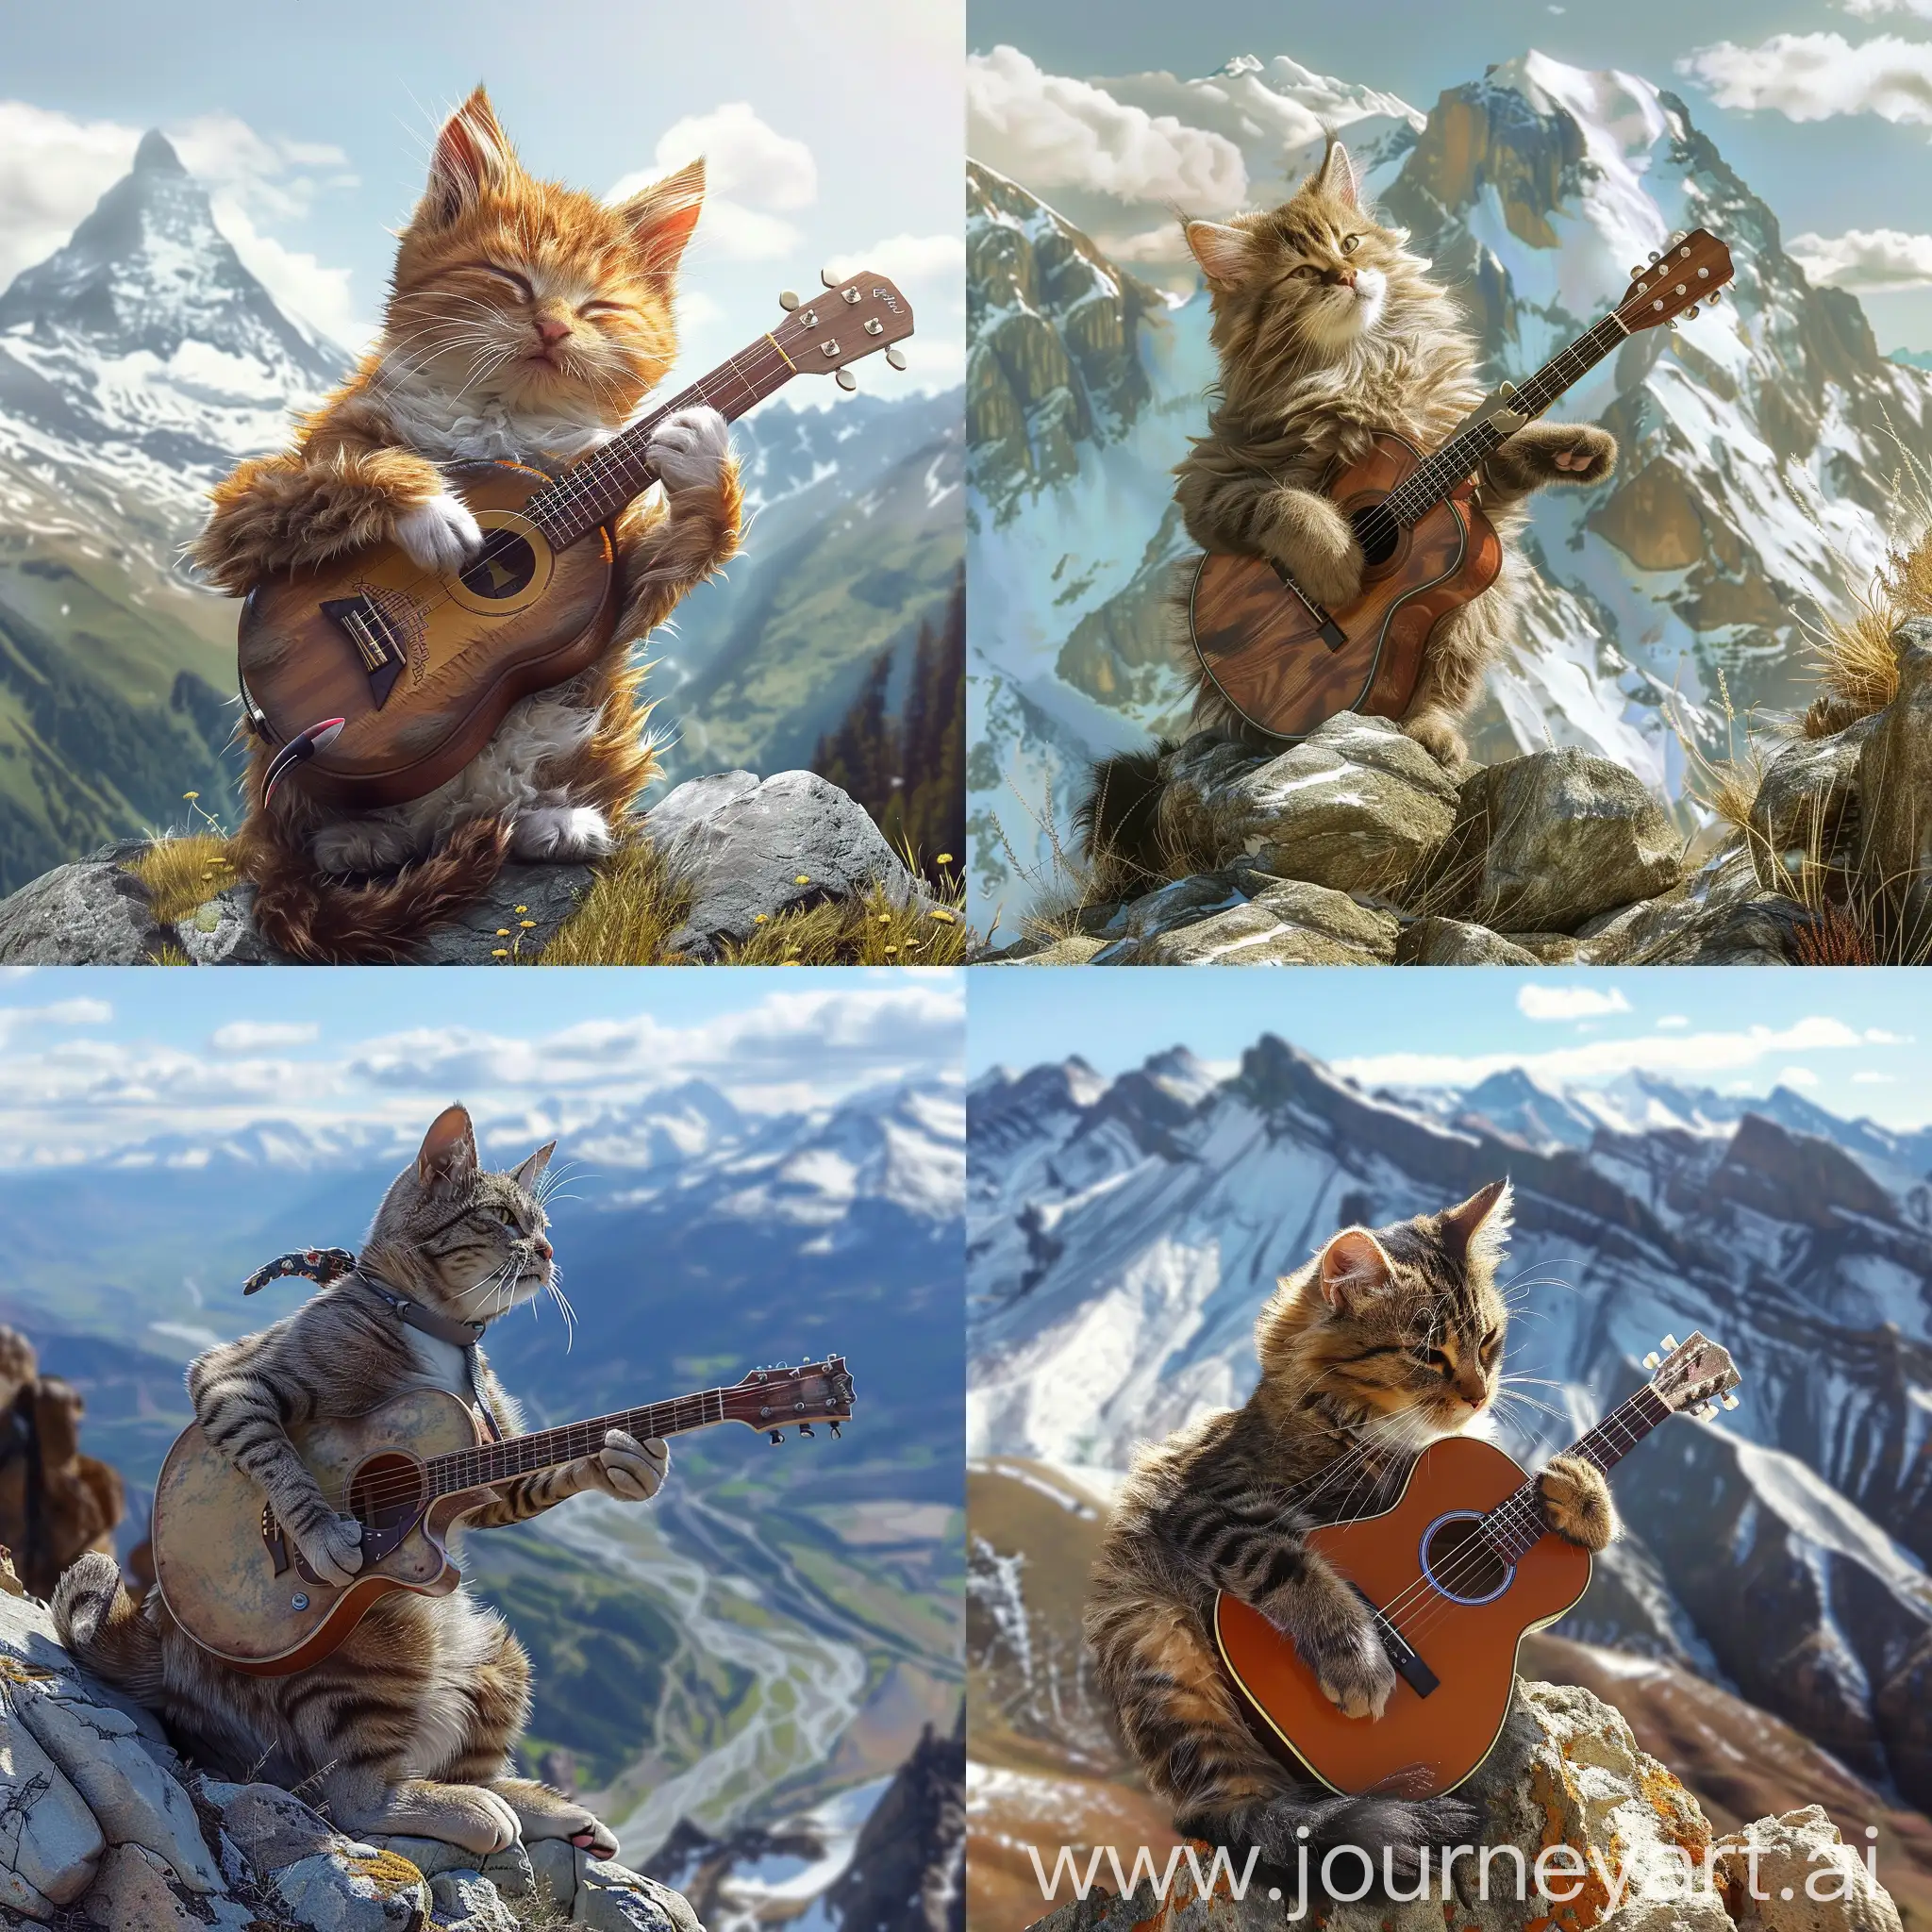 A cat playing a guitar on a mountain. Ultra realistic